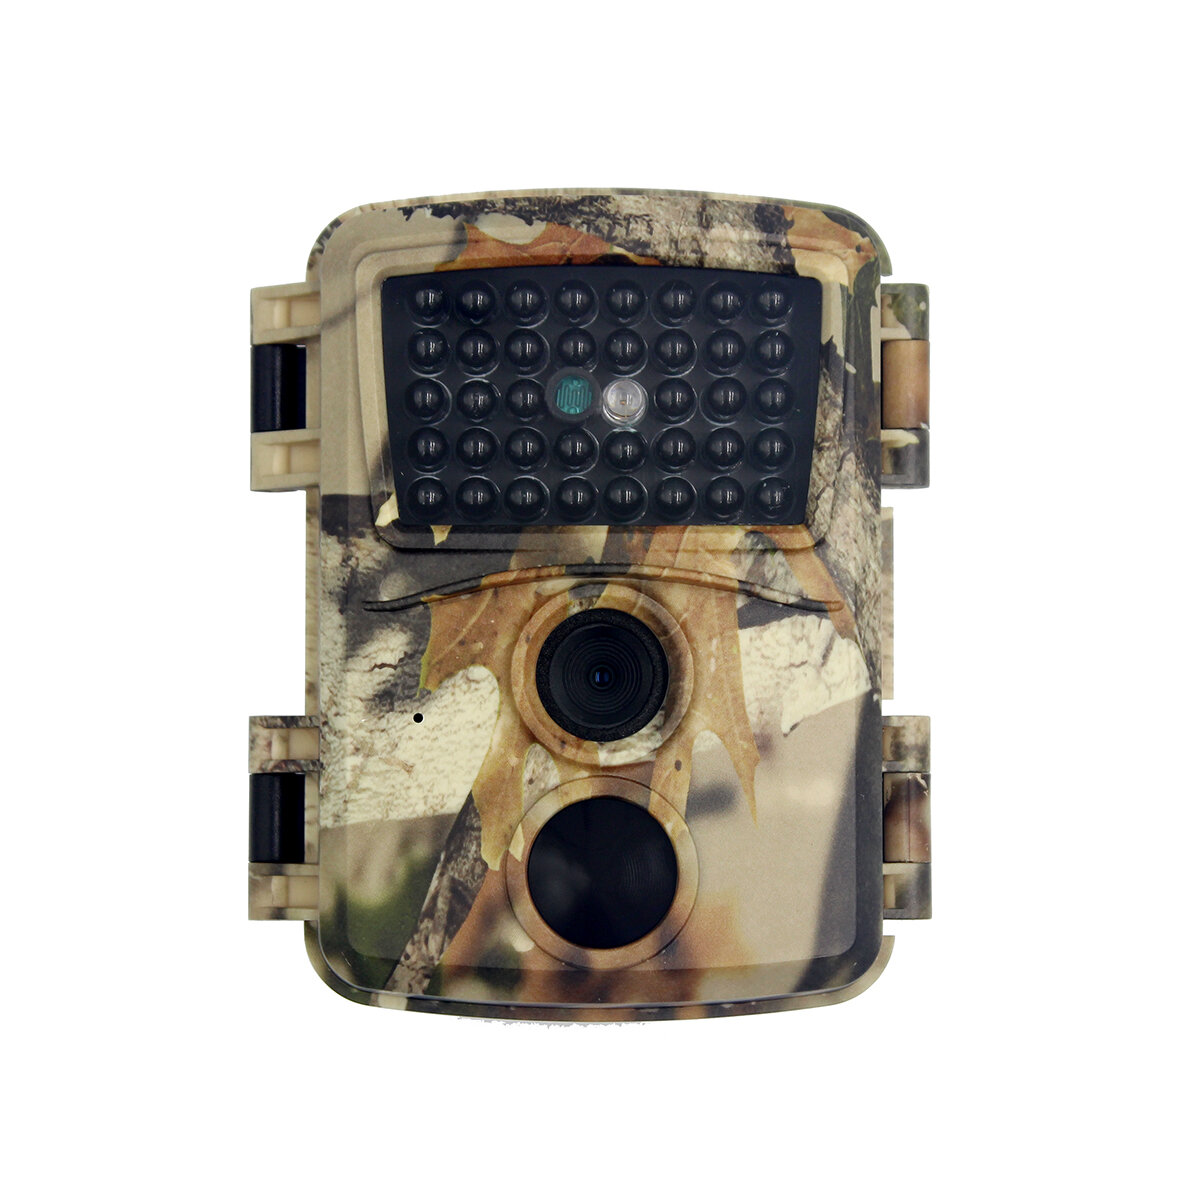 Pr600c 12mp 1080p night vision waterproof hunting camera 0.8s trigger time recorder wildlife trail camera for home security and wildlife monitoring